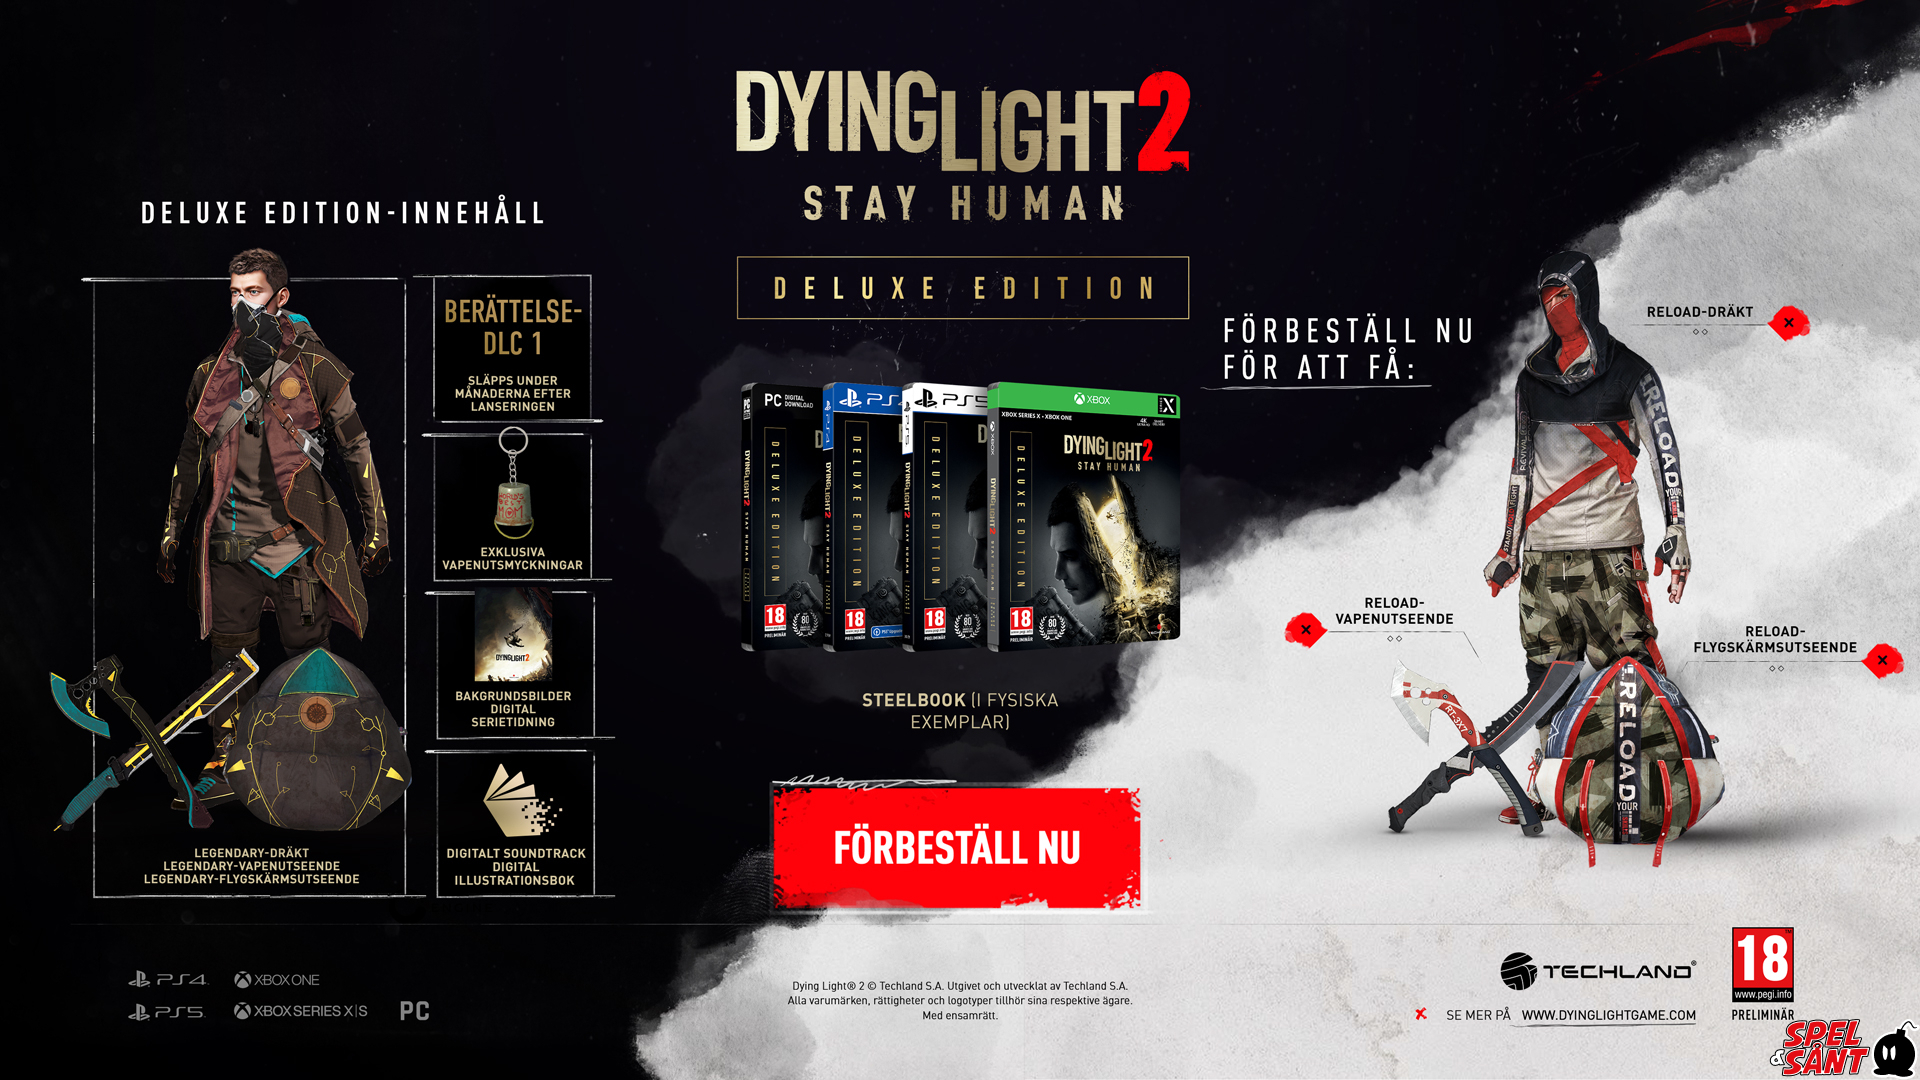 Stay human 1. Dying Light 2 коллекционное издание. Dying Light 2 stay Human коллекционное издание. Dying Light 2 коллекционное издание предзаказ.